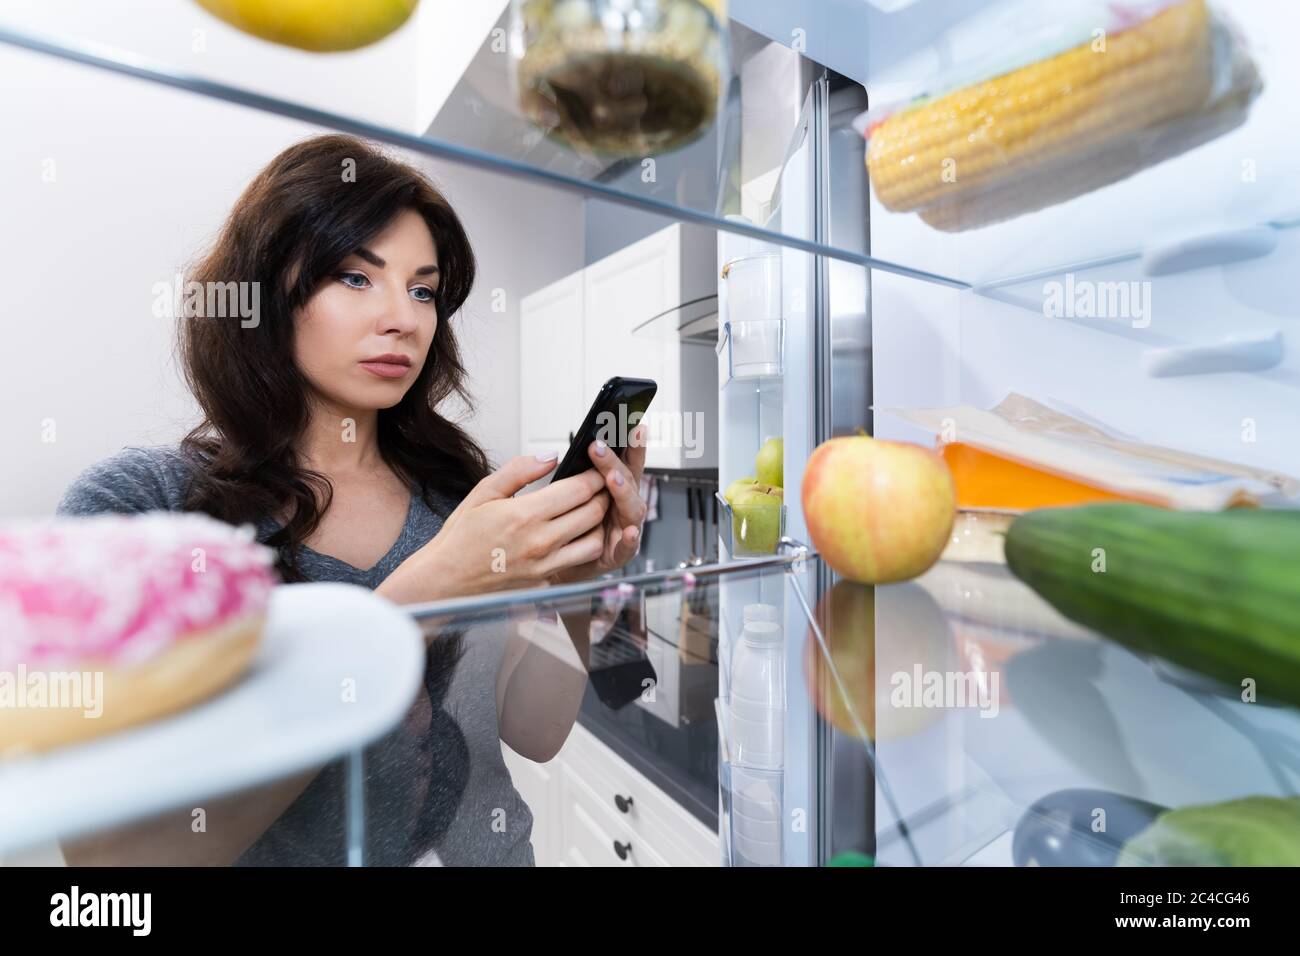 Grocery Shopping List Convenient Mobile Phone App Stock Photo